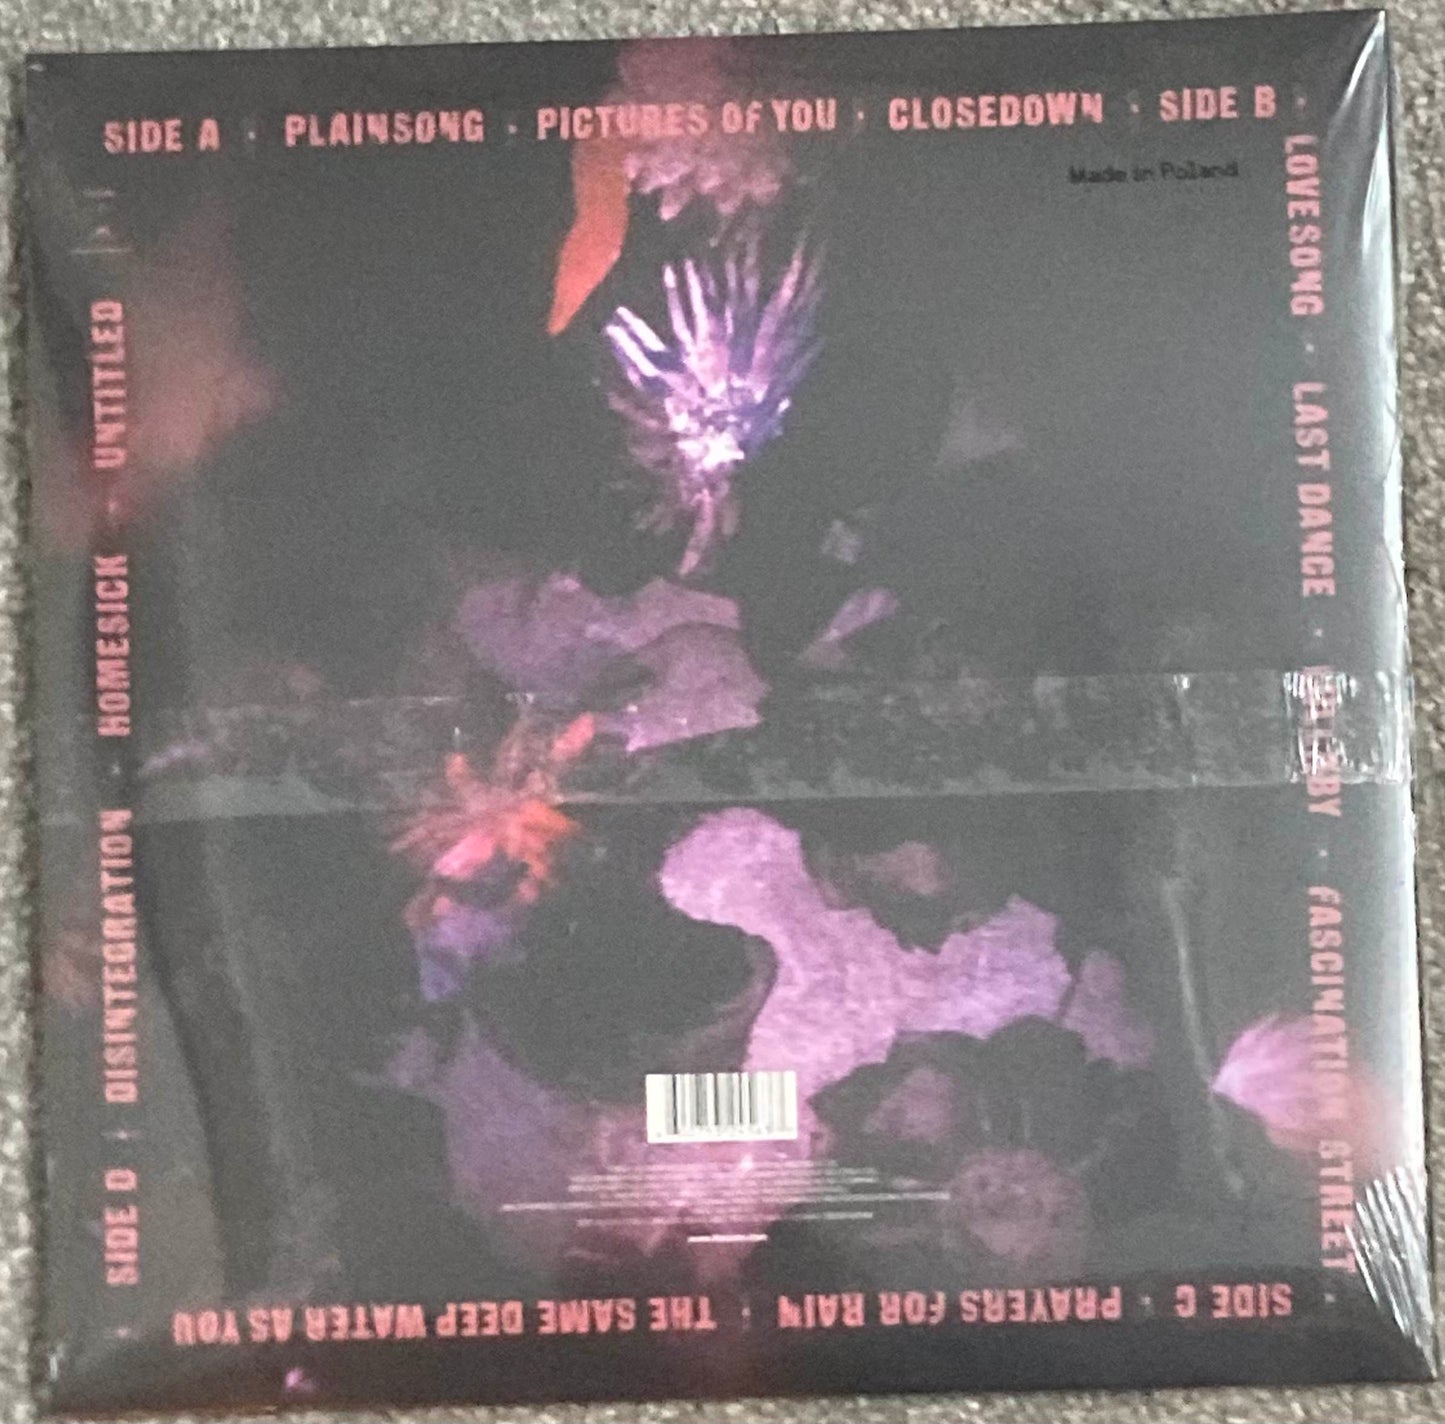 The back of The Cure - Disintegration on vinyl